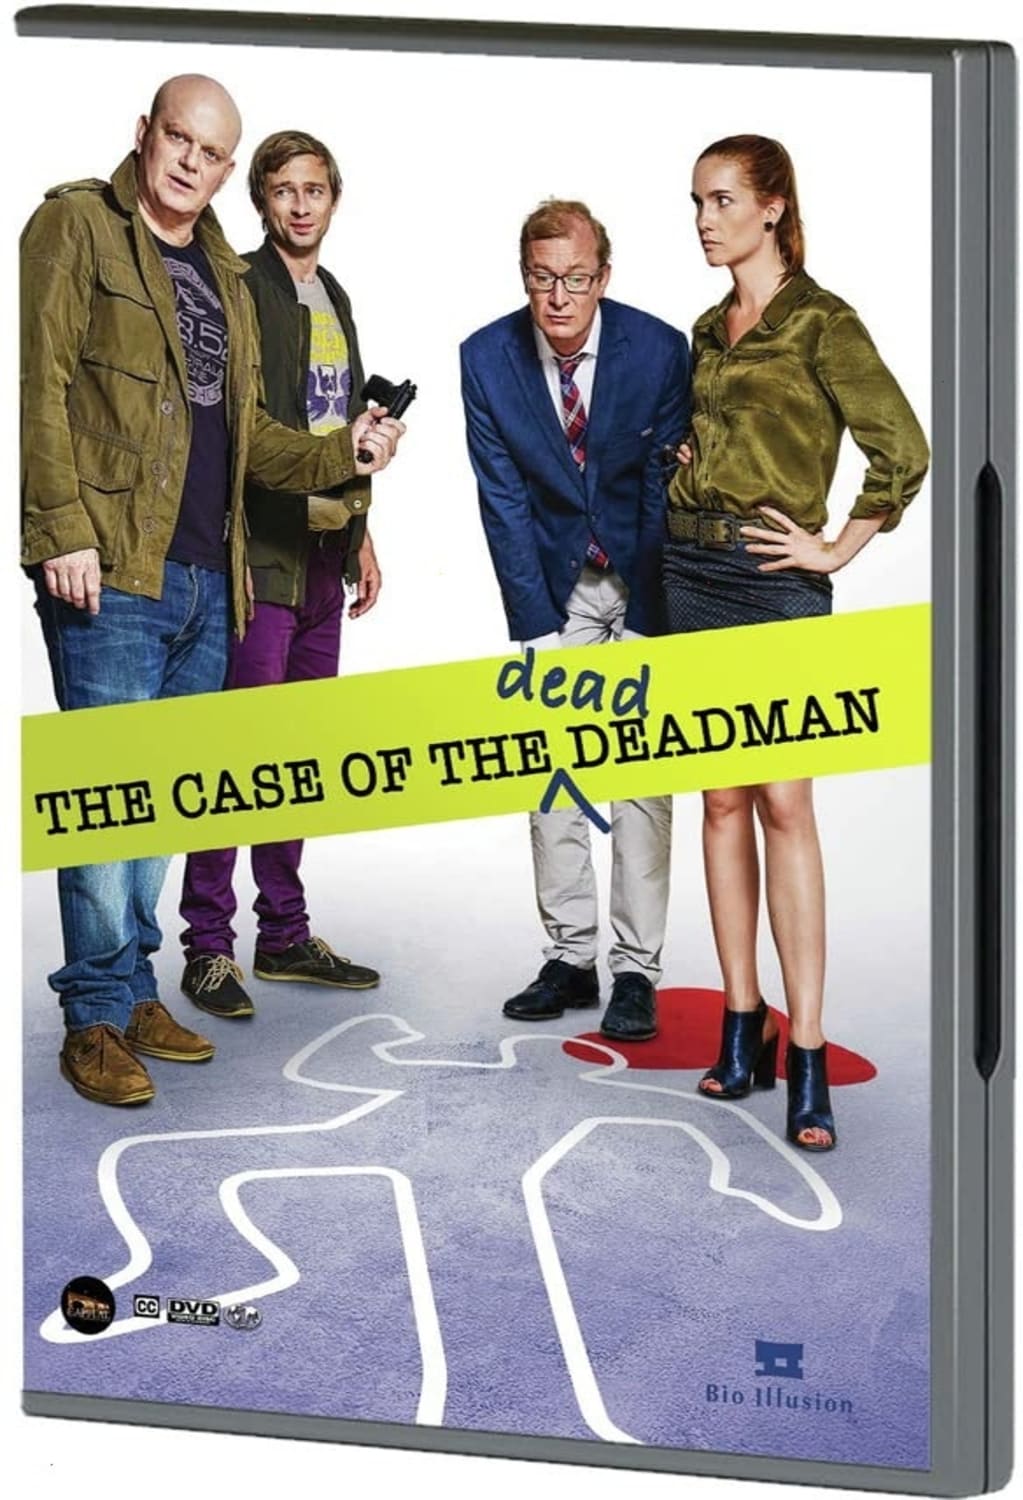 The Case of the Dead Deadman (DVD) on MovieShack